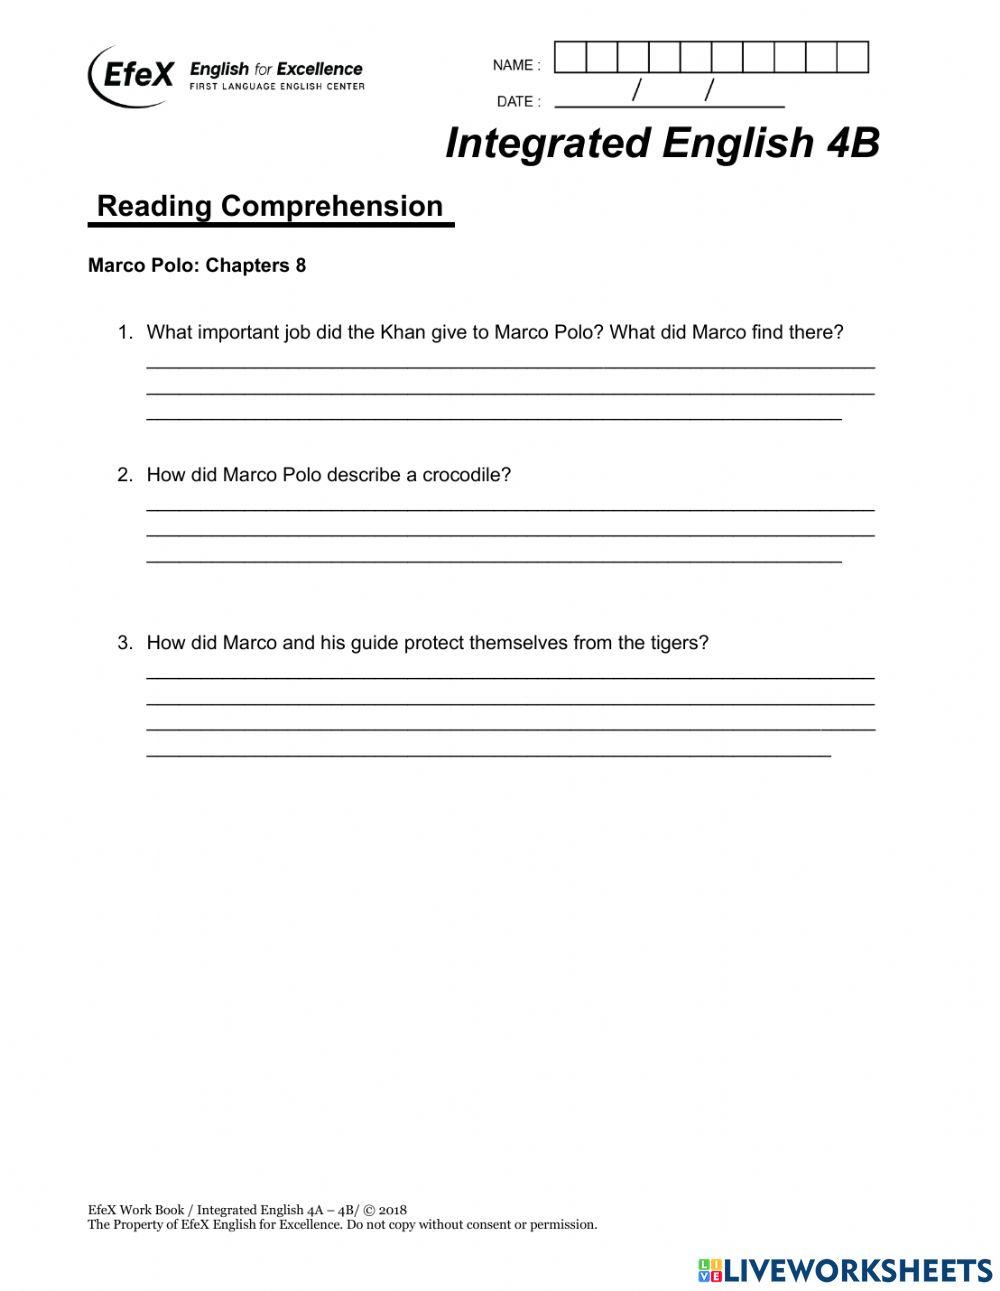 IE 4B Reading Comprehension